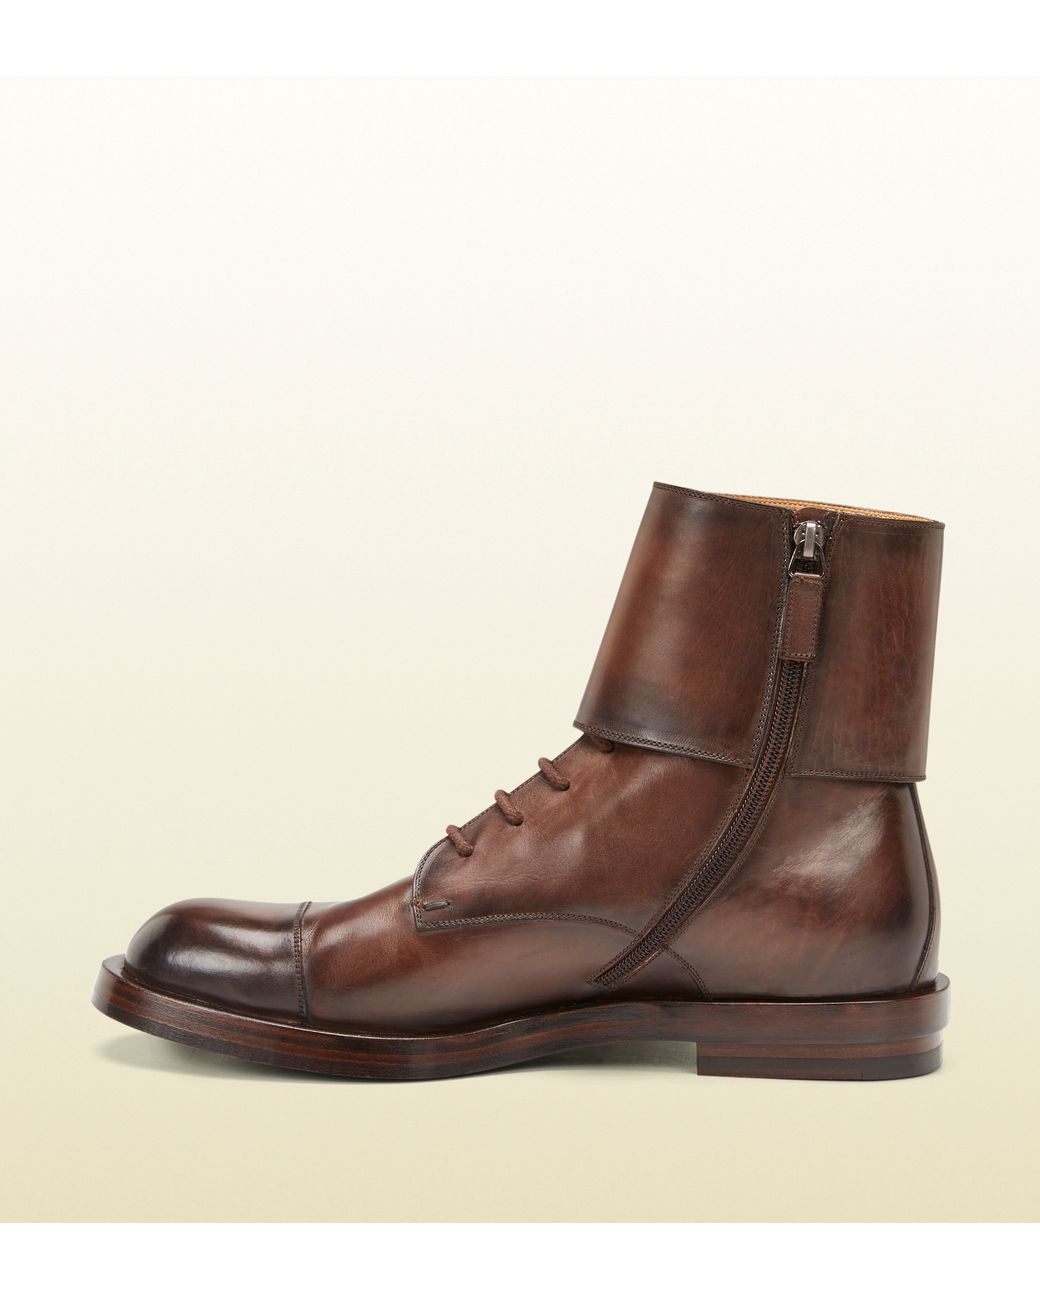 Gucci Military Style Boots in Brown for Men